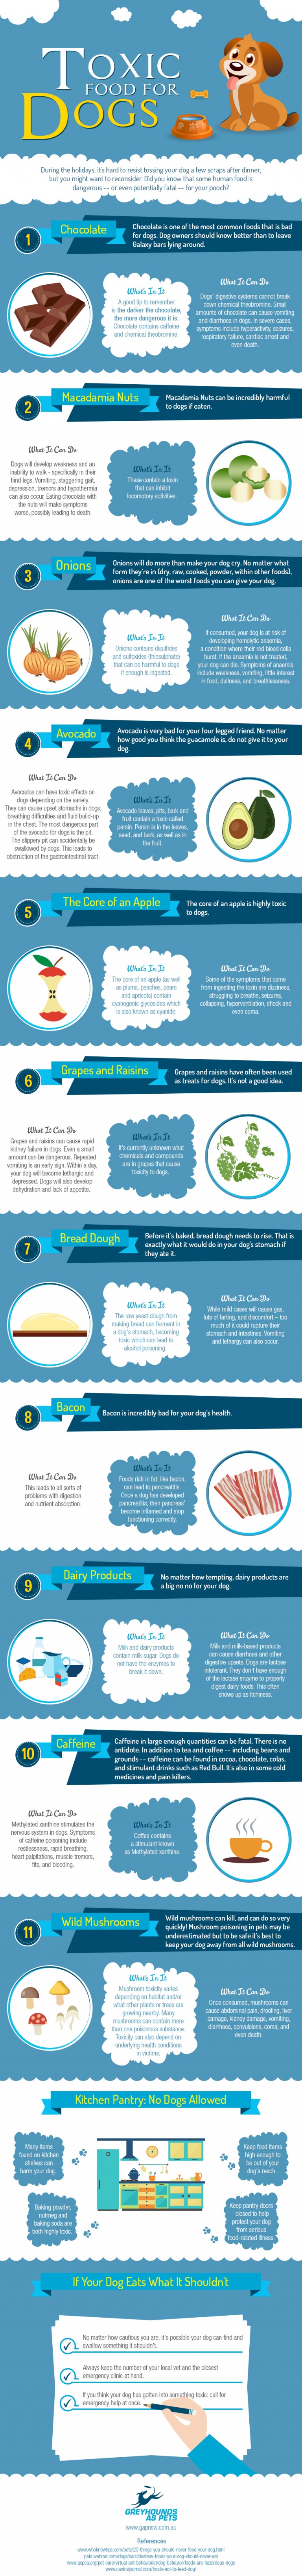 Toxic Foods for Your Dogs [Infographic]